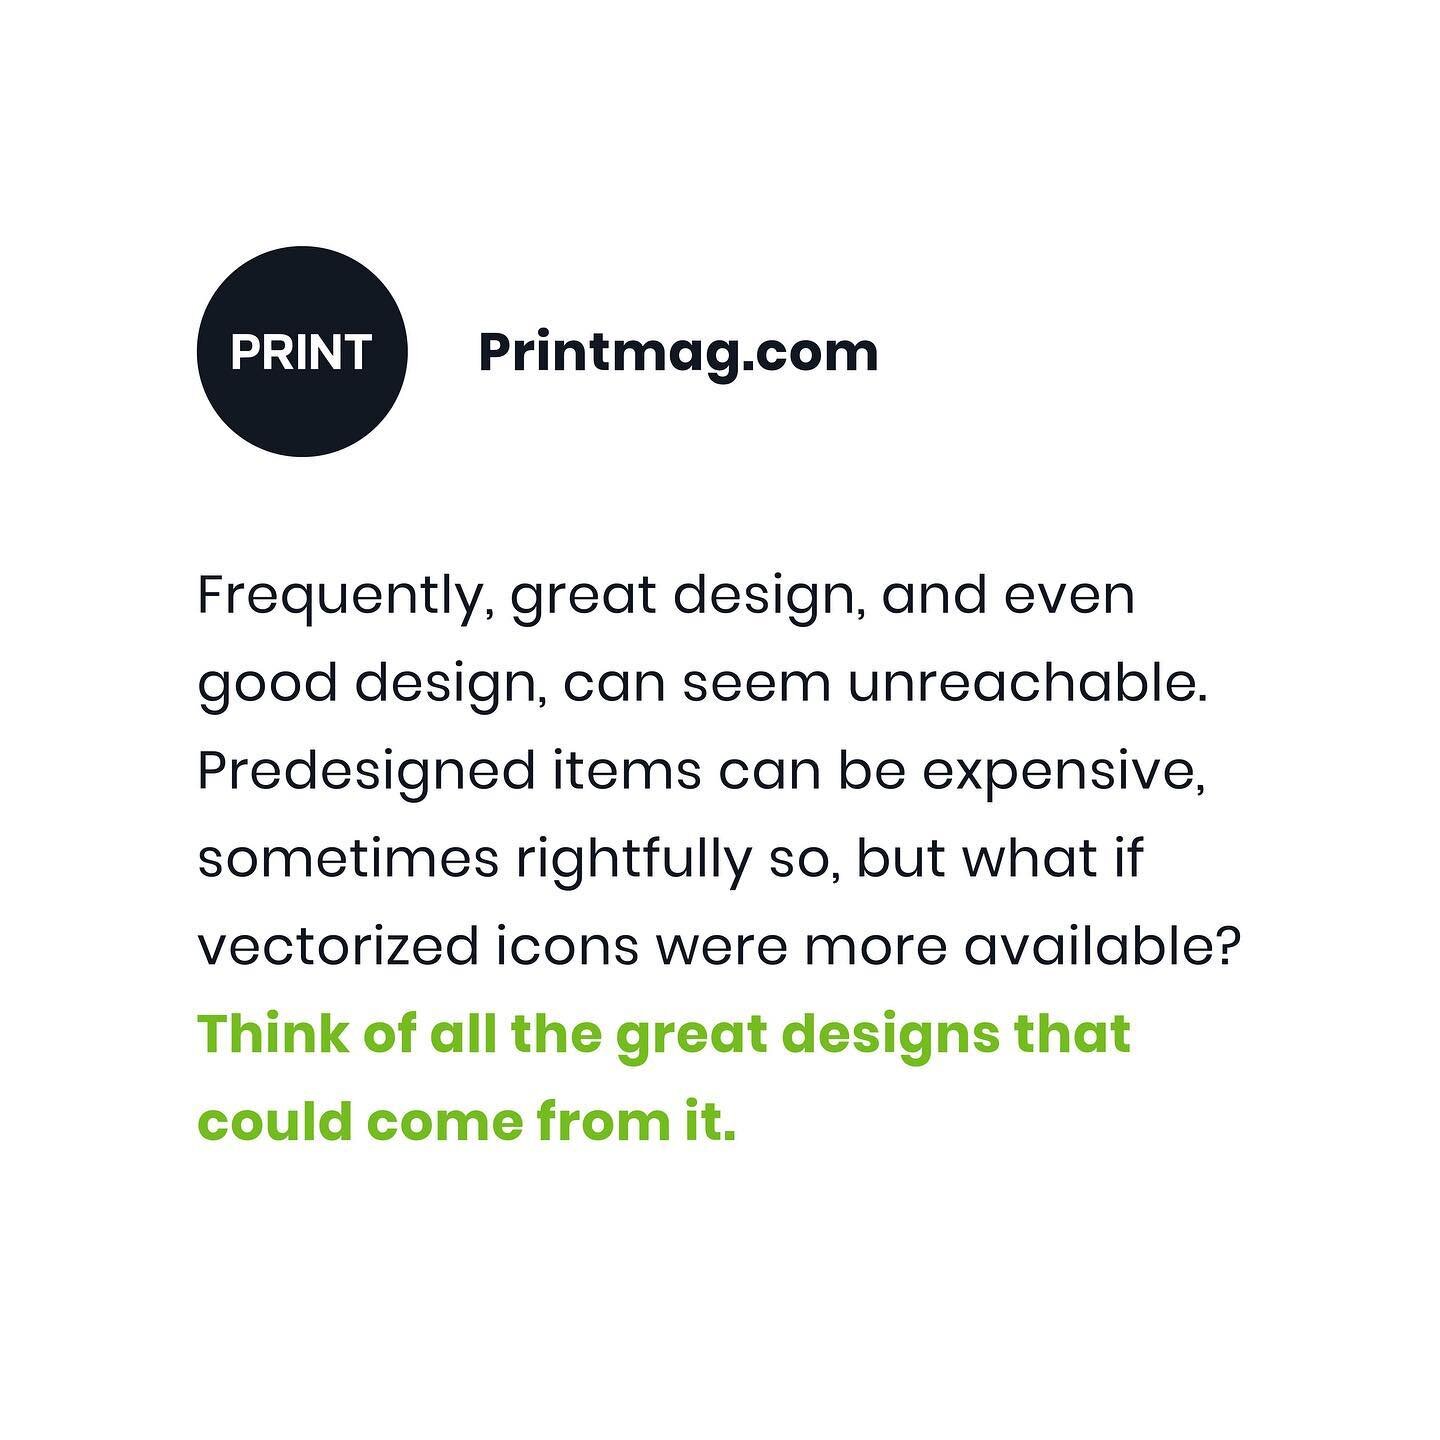 Well said! Read our full feature on Printmag.com. Link in bio.

#icon #iconaday #iconography #graphicdesign #design #designer #logo #illustration #branding #graphic #logodesign #creative #typography #marketing #drawing #brand #vector #digitalart #web